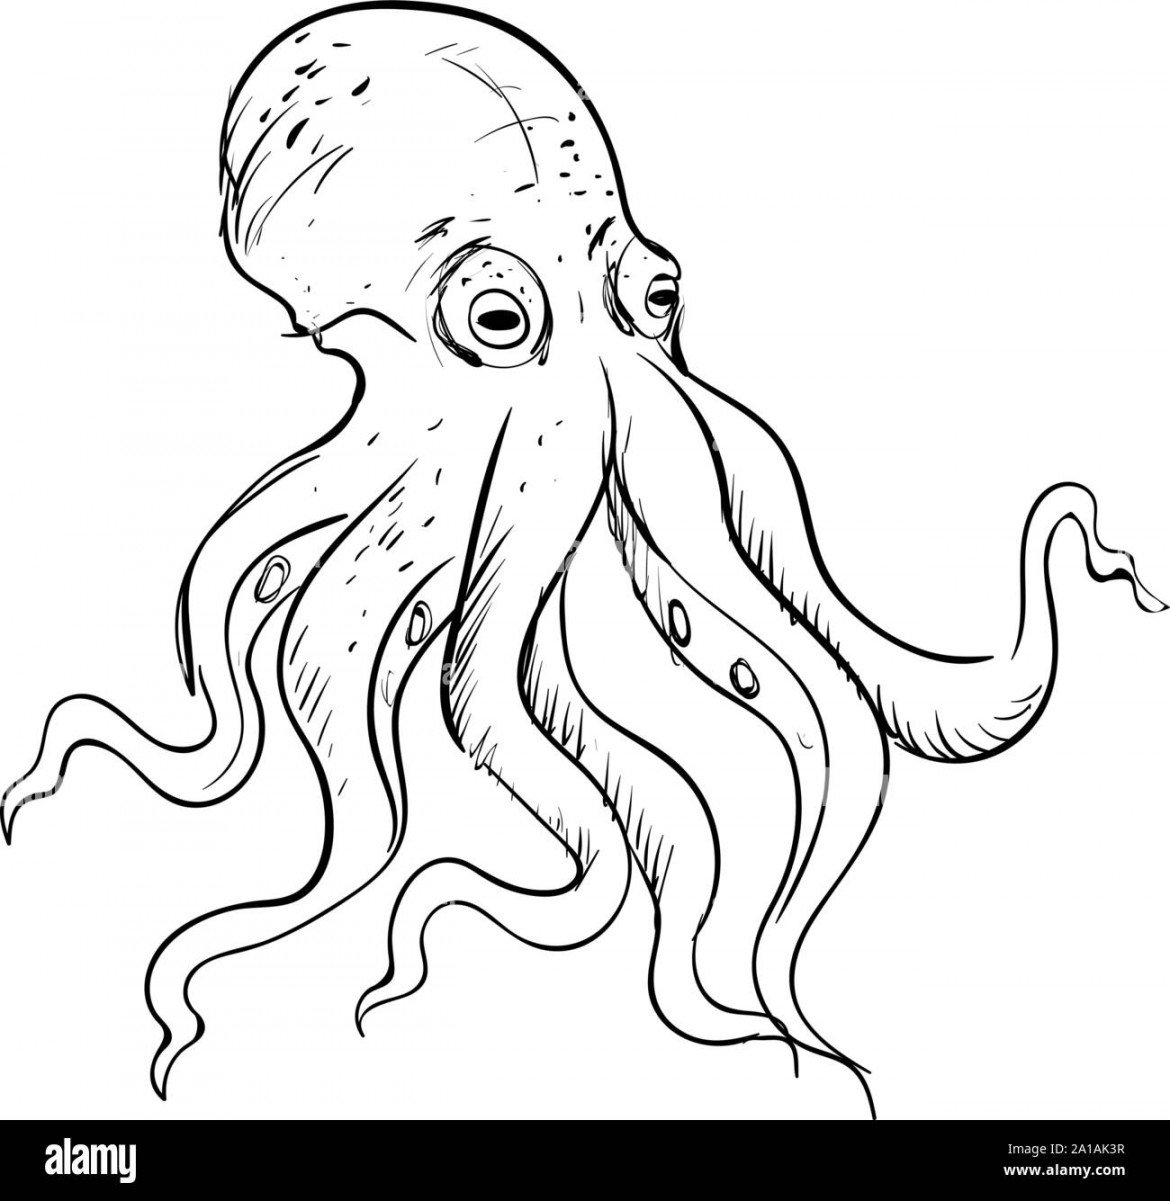 Octopus drawing, illustration, vector on white background Stock